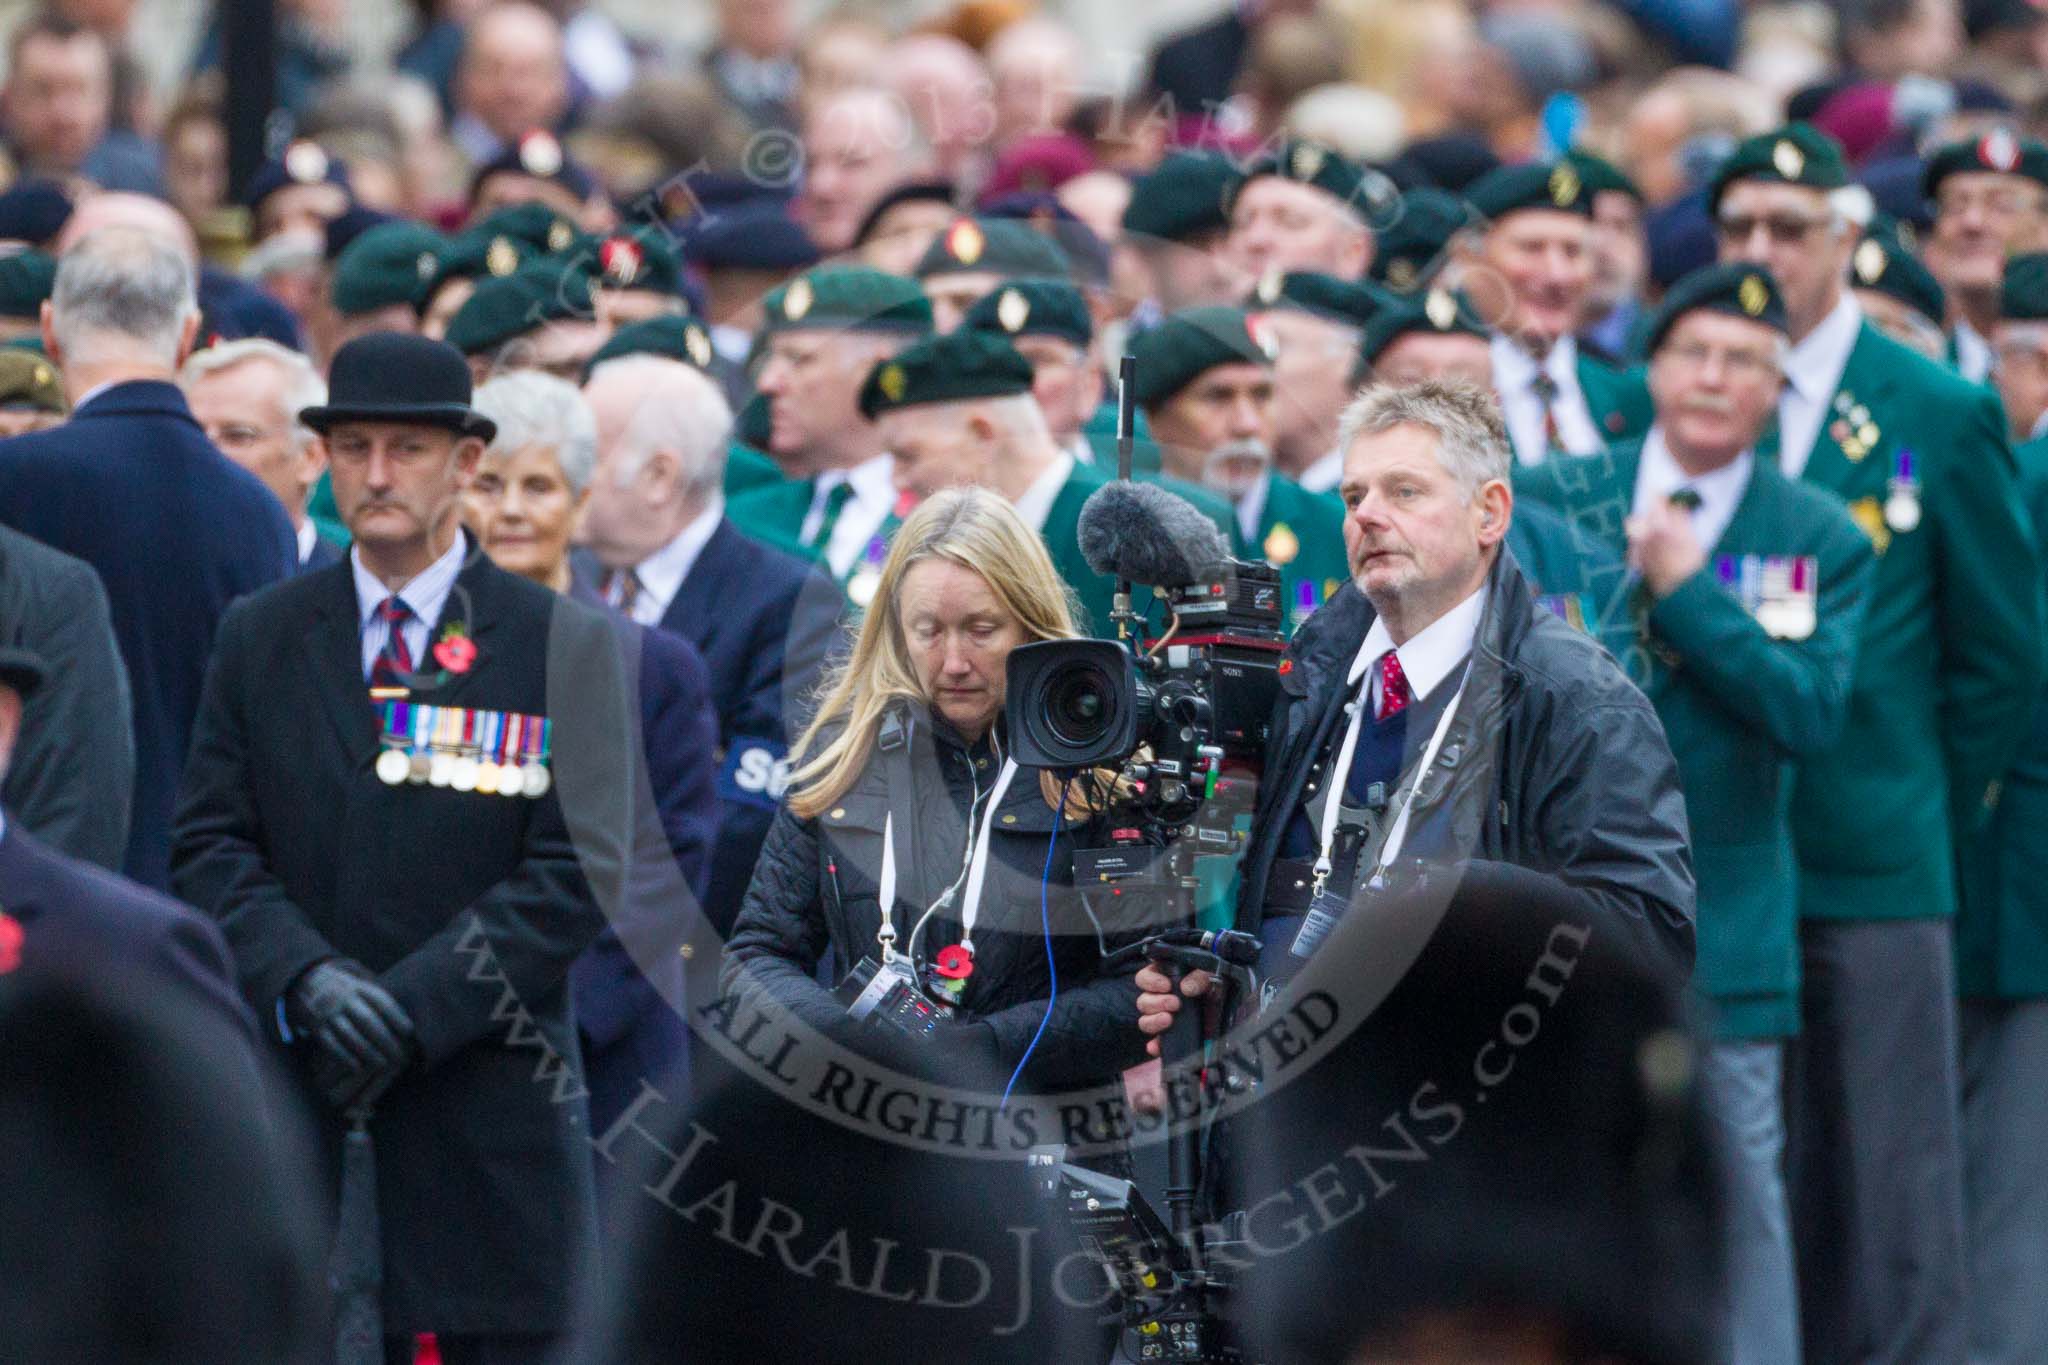 Remembrance Sunday at the Cenotaph 2015: The BBC Steadycam operator ready to film the veterans for the live broadcast during the March Past. Image #355, 08 November 2015 11:32 Whitehall, London, UK